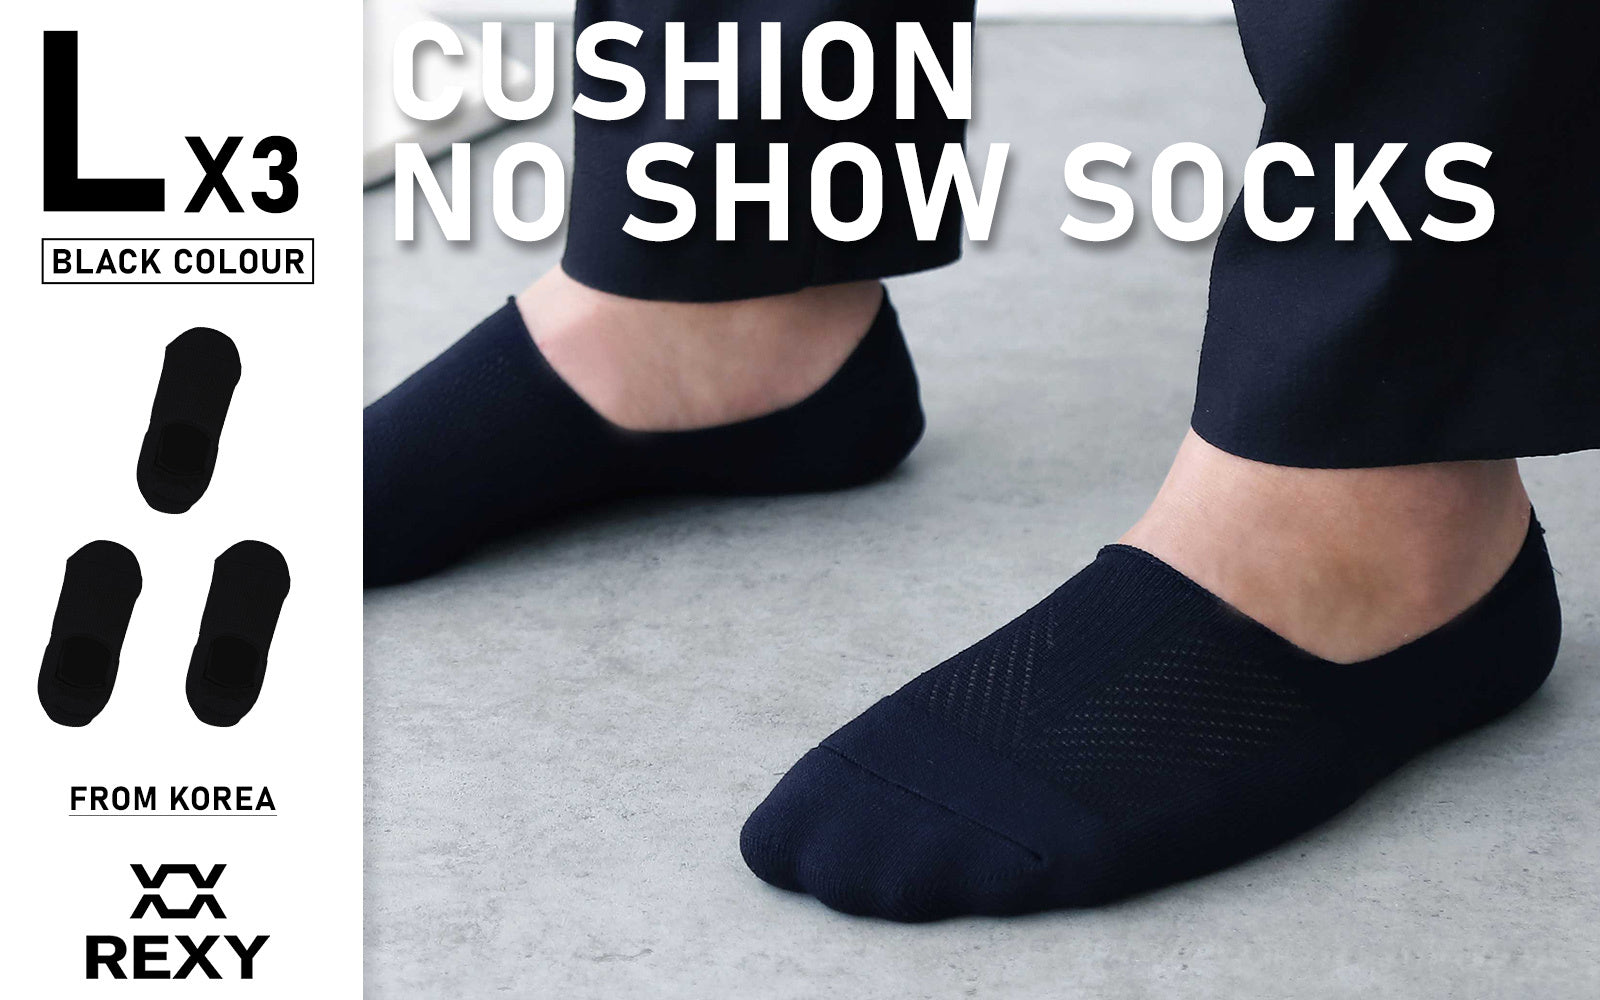 3X Rexy Cushion No Show Ankle Socks Large Non-Slip Breathable BLACK - 0